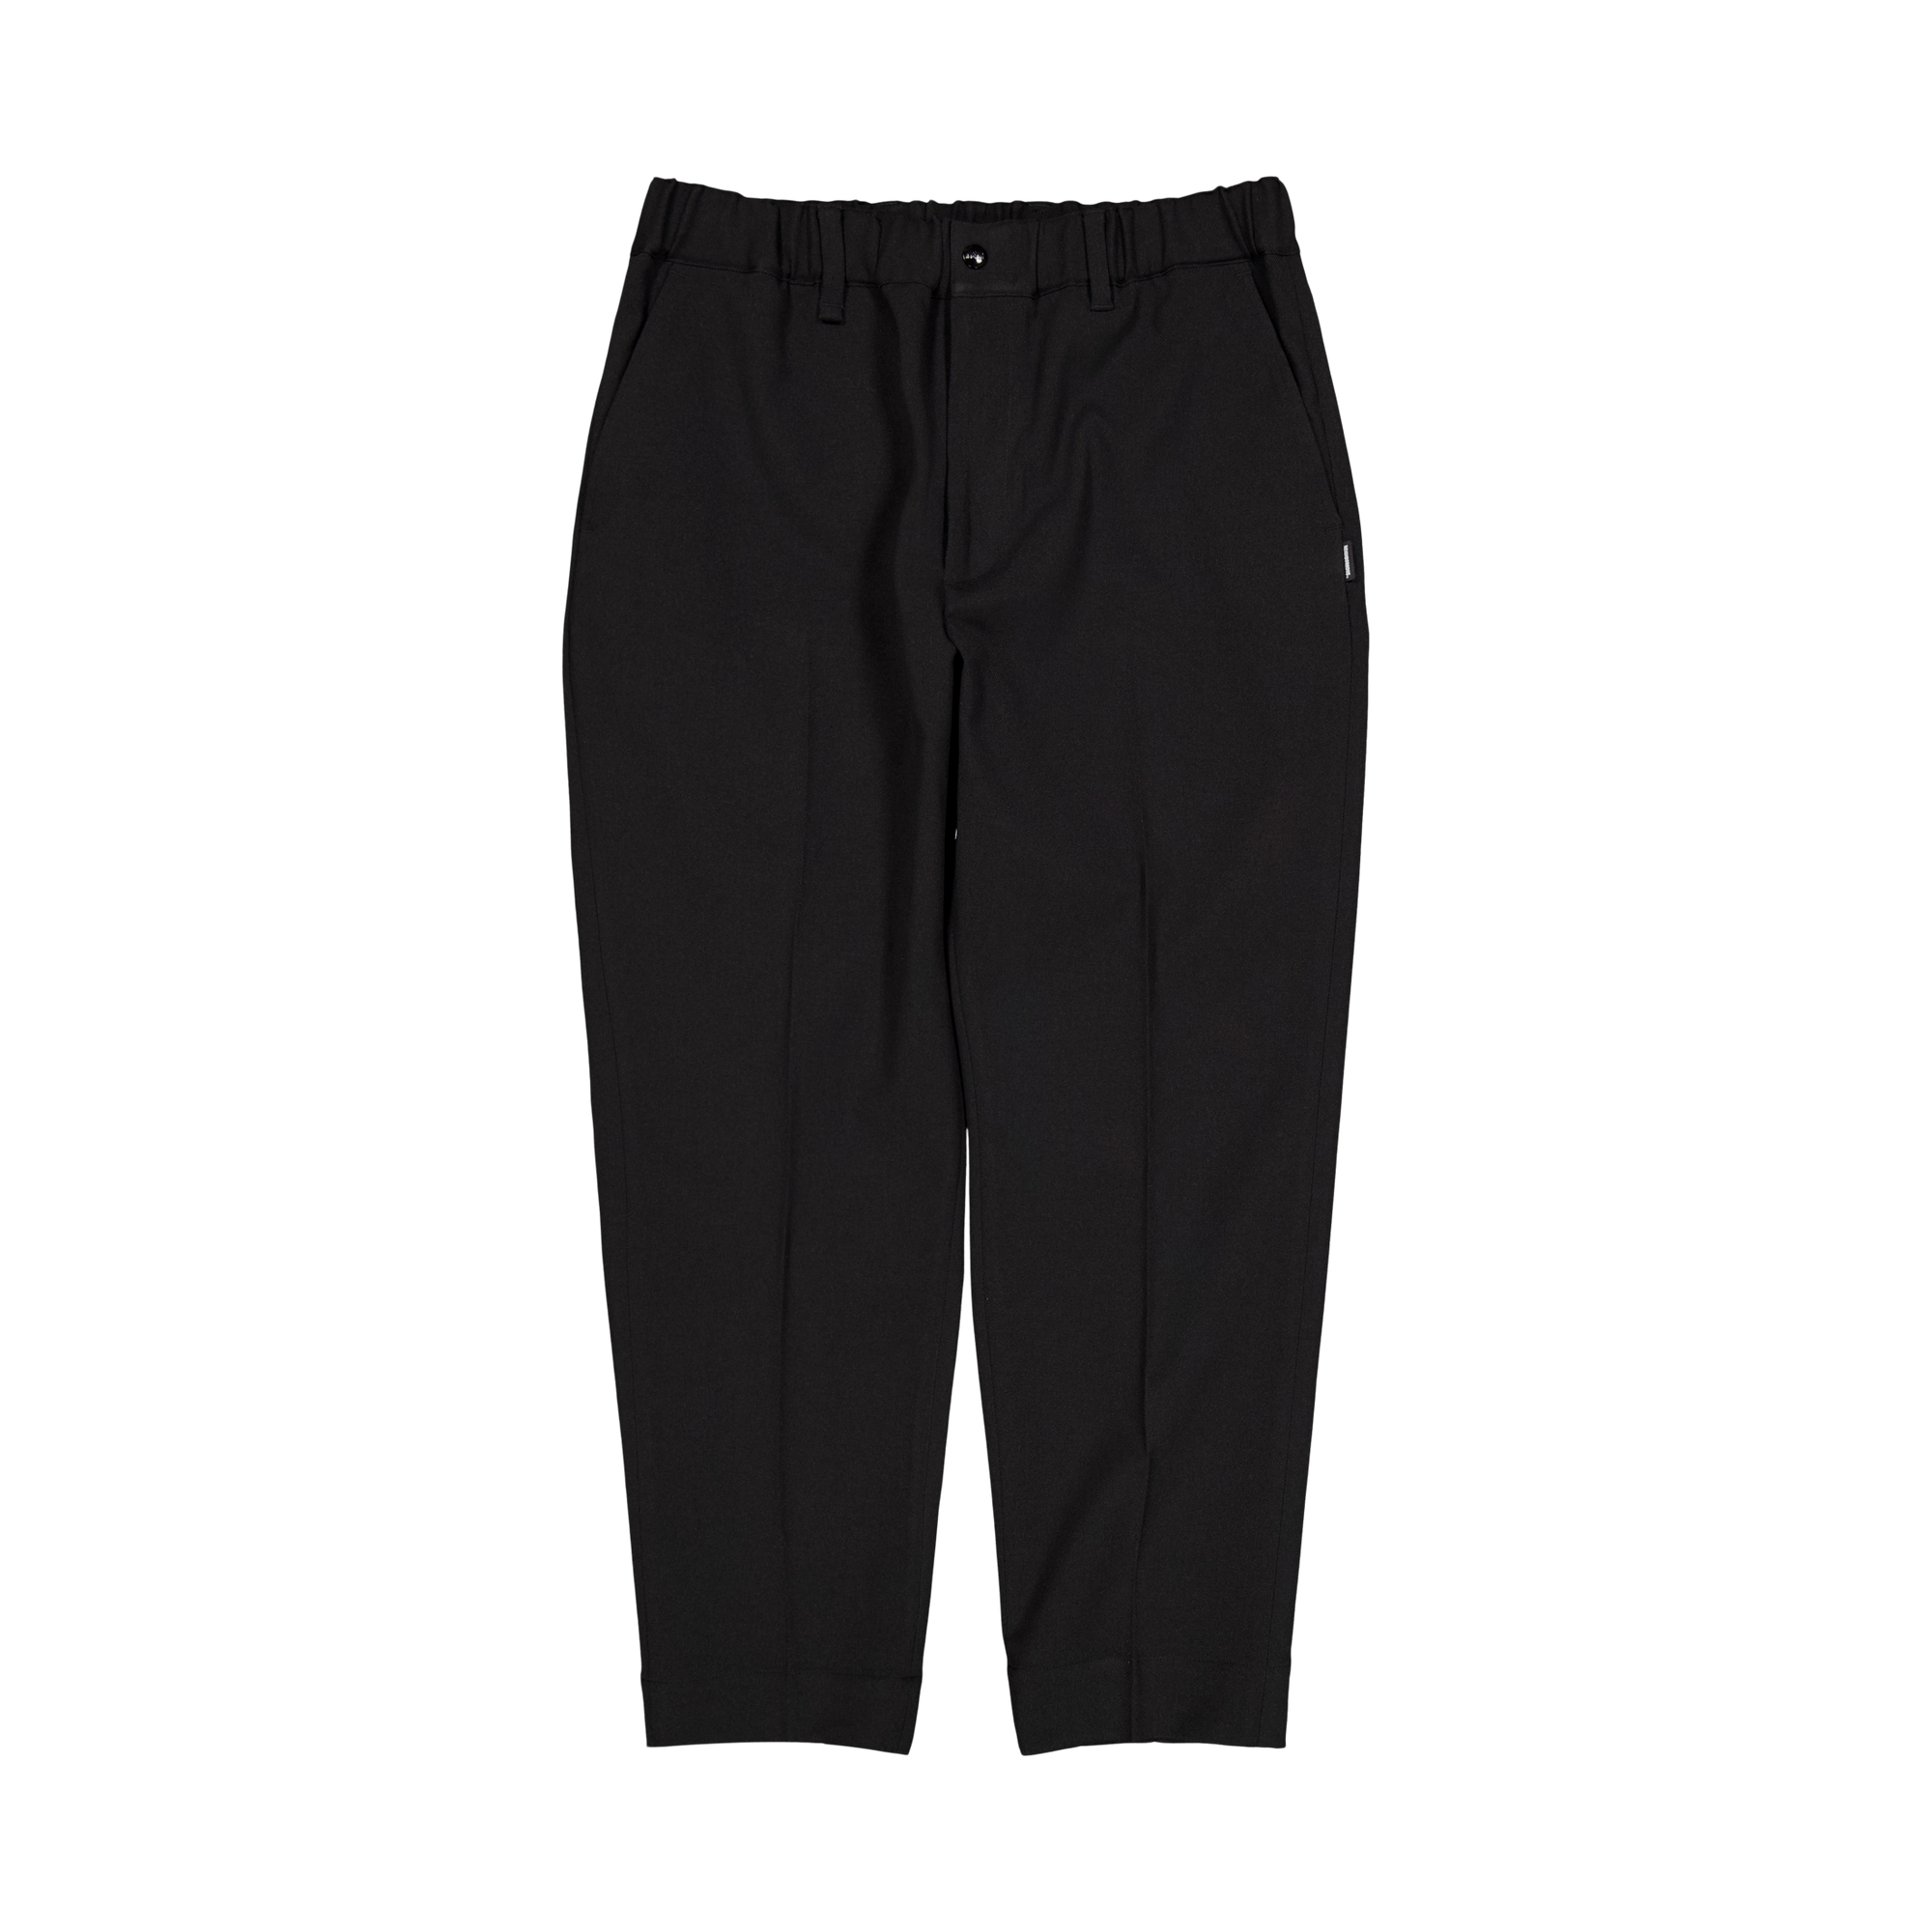 Tapered Silhouette Pants Black